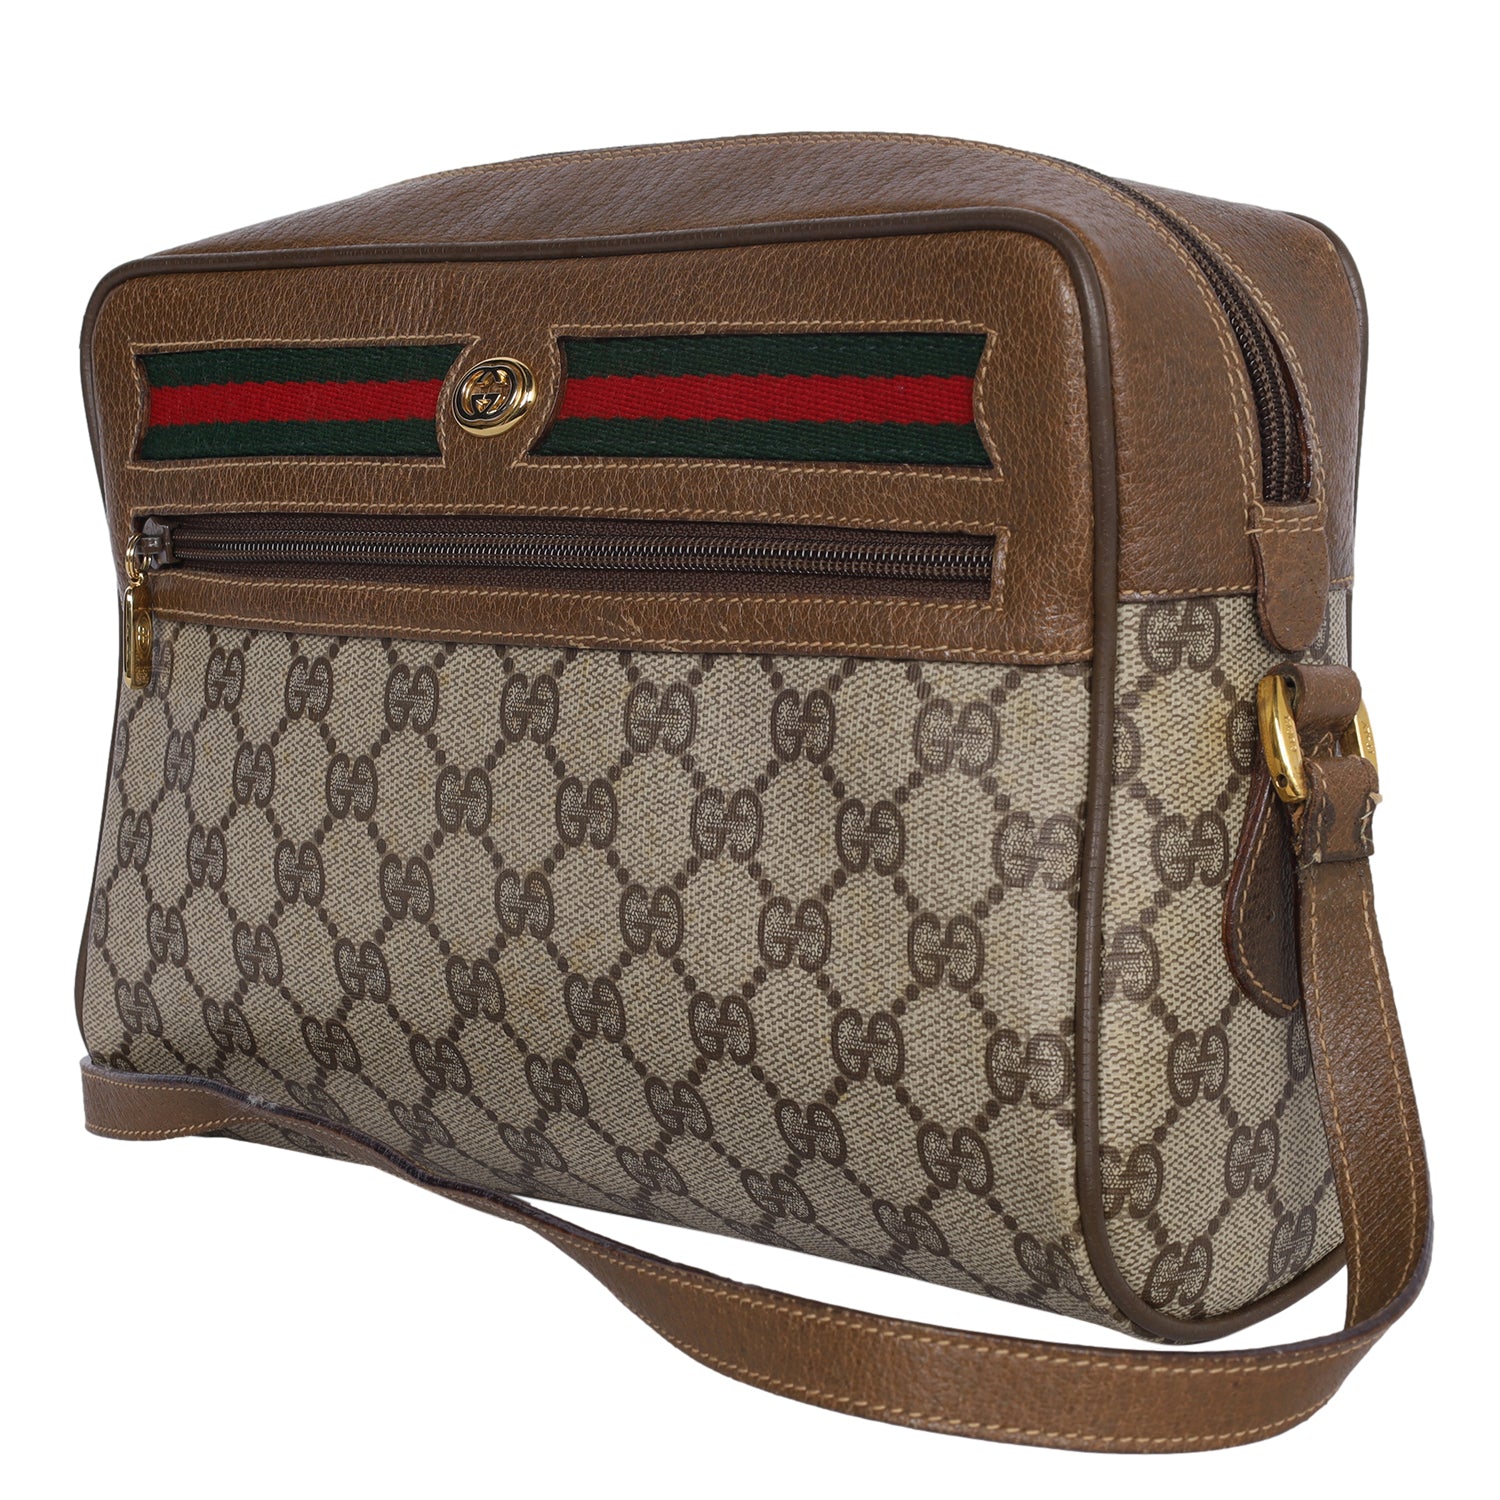 Authentic pre-owned Gucci sherry line crossbody shoulder bag